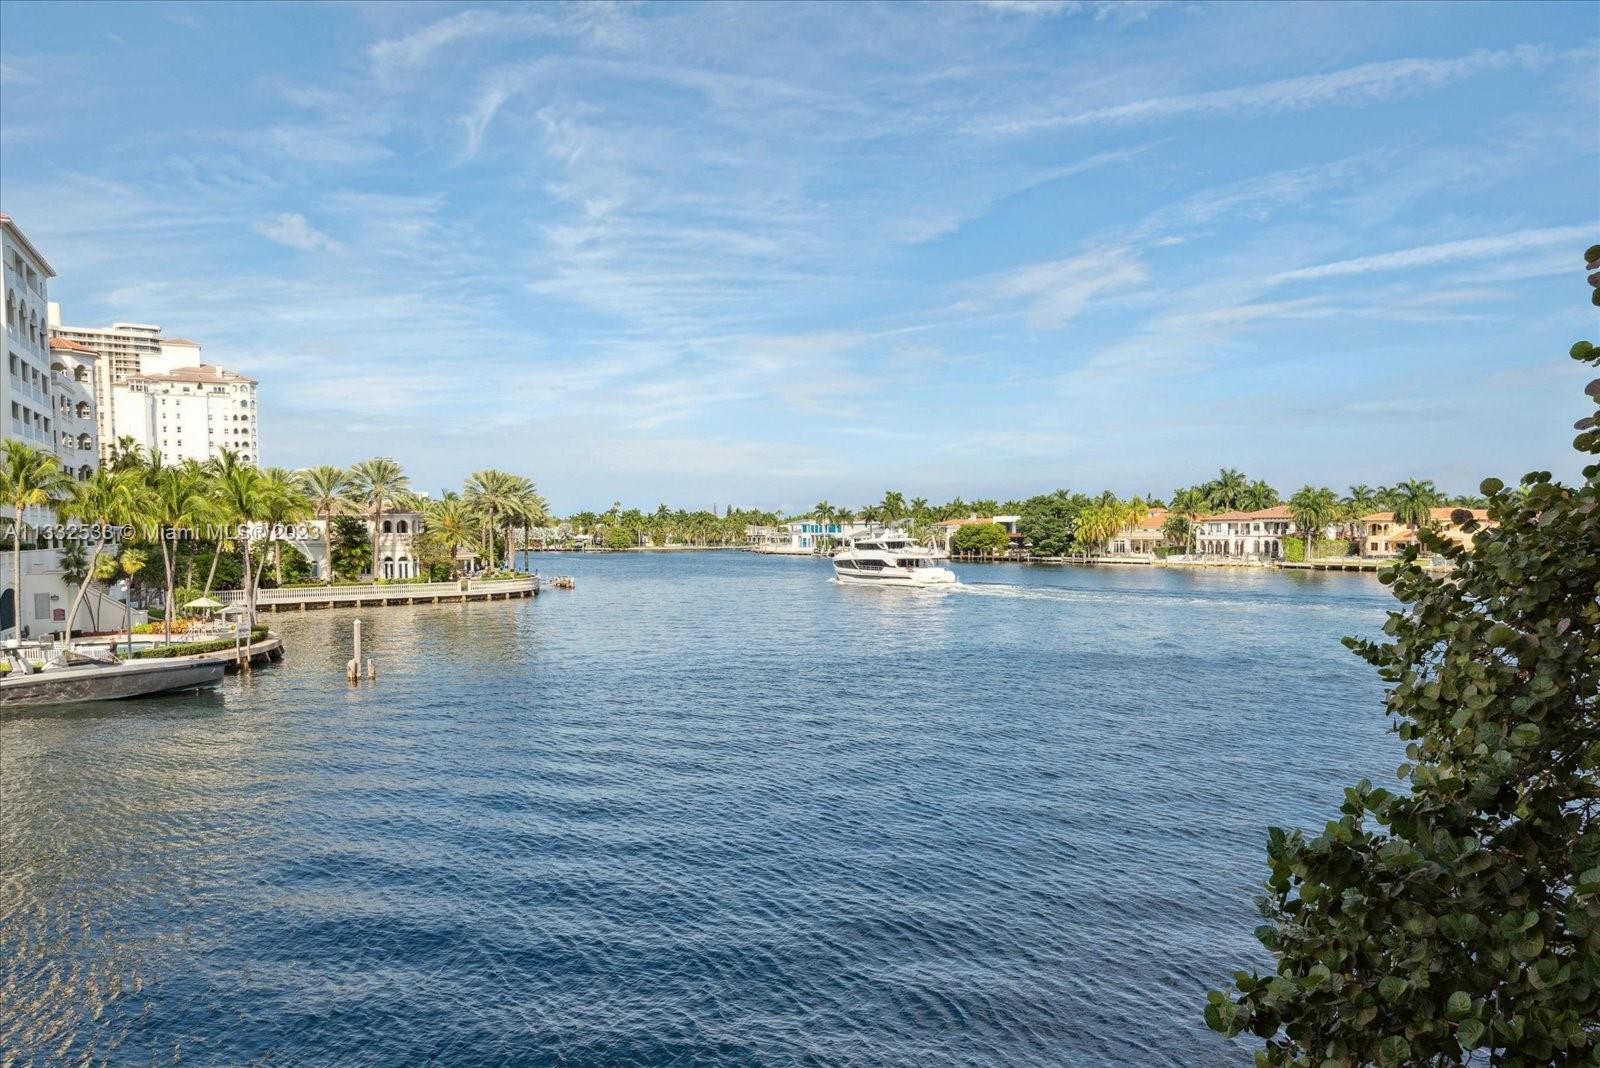 This Unit is One of a Kind and Rarely Available! An amazing 2Bd. 2.5 Bth. townhouse located in prestigious Turnberry Isle North Tower with incredible Intracoastal views from every corner.  The spacious 2560 Sq.Ft. of living space is spread over two floors and features a large terrace on both floors as well as a huge walk-around balcony. The sunken living room and open concept custom kitchen with Sub-Zero appliances make this unit perfect for entertaining.  Being sold fully furnished with high-end finishes and custom built-ins, all renovated with modern upgrades.  Venetian plaster and large porcelain tile floors add to the luxurious feel of the space.  Enjoy the convenience of a first or second floor entry from the exterior. A great location and a  Genuine Waterfront Paradise!